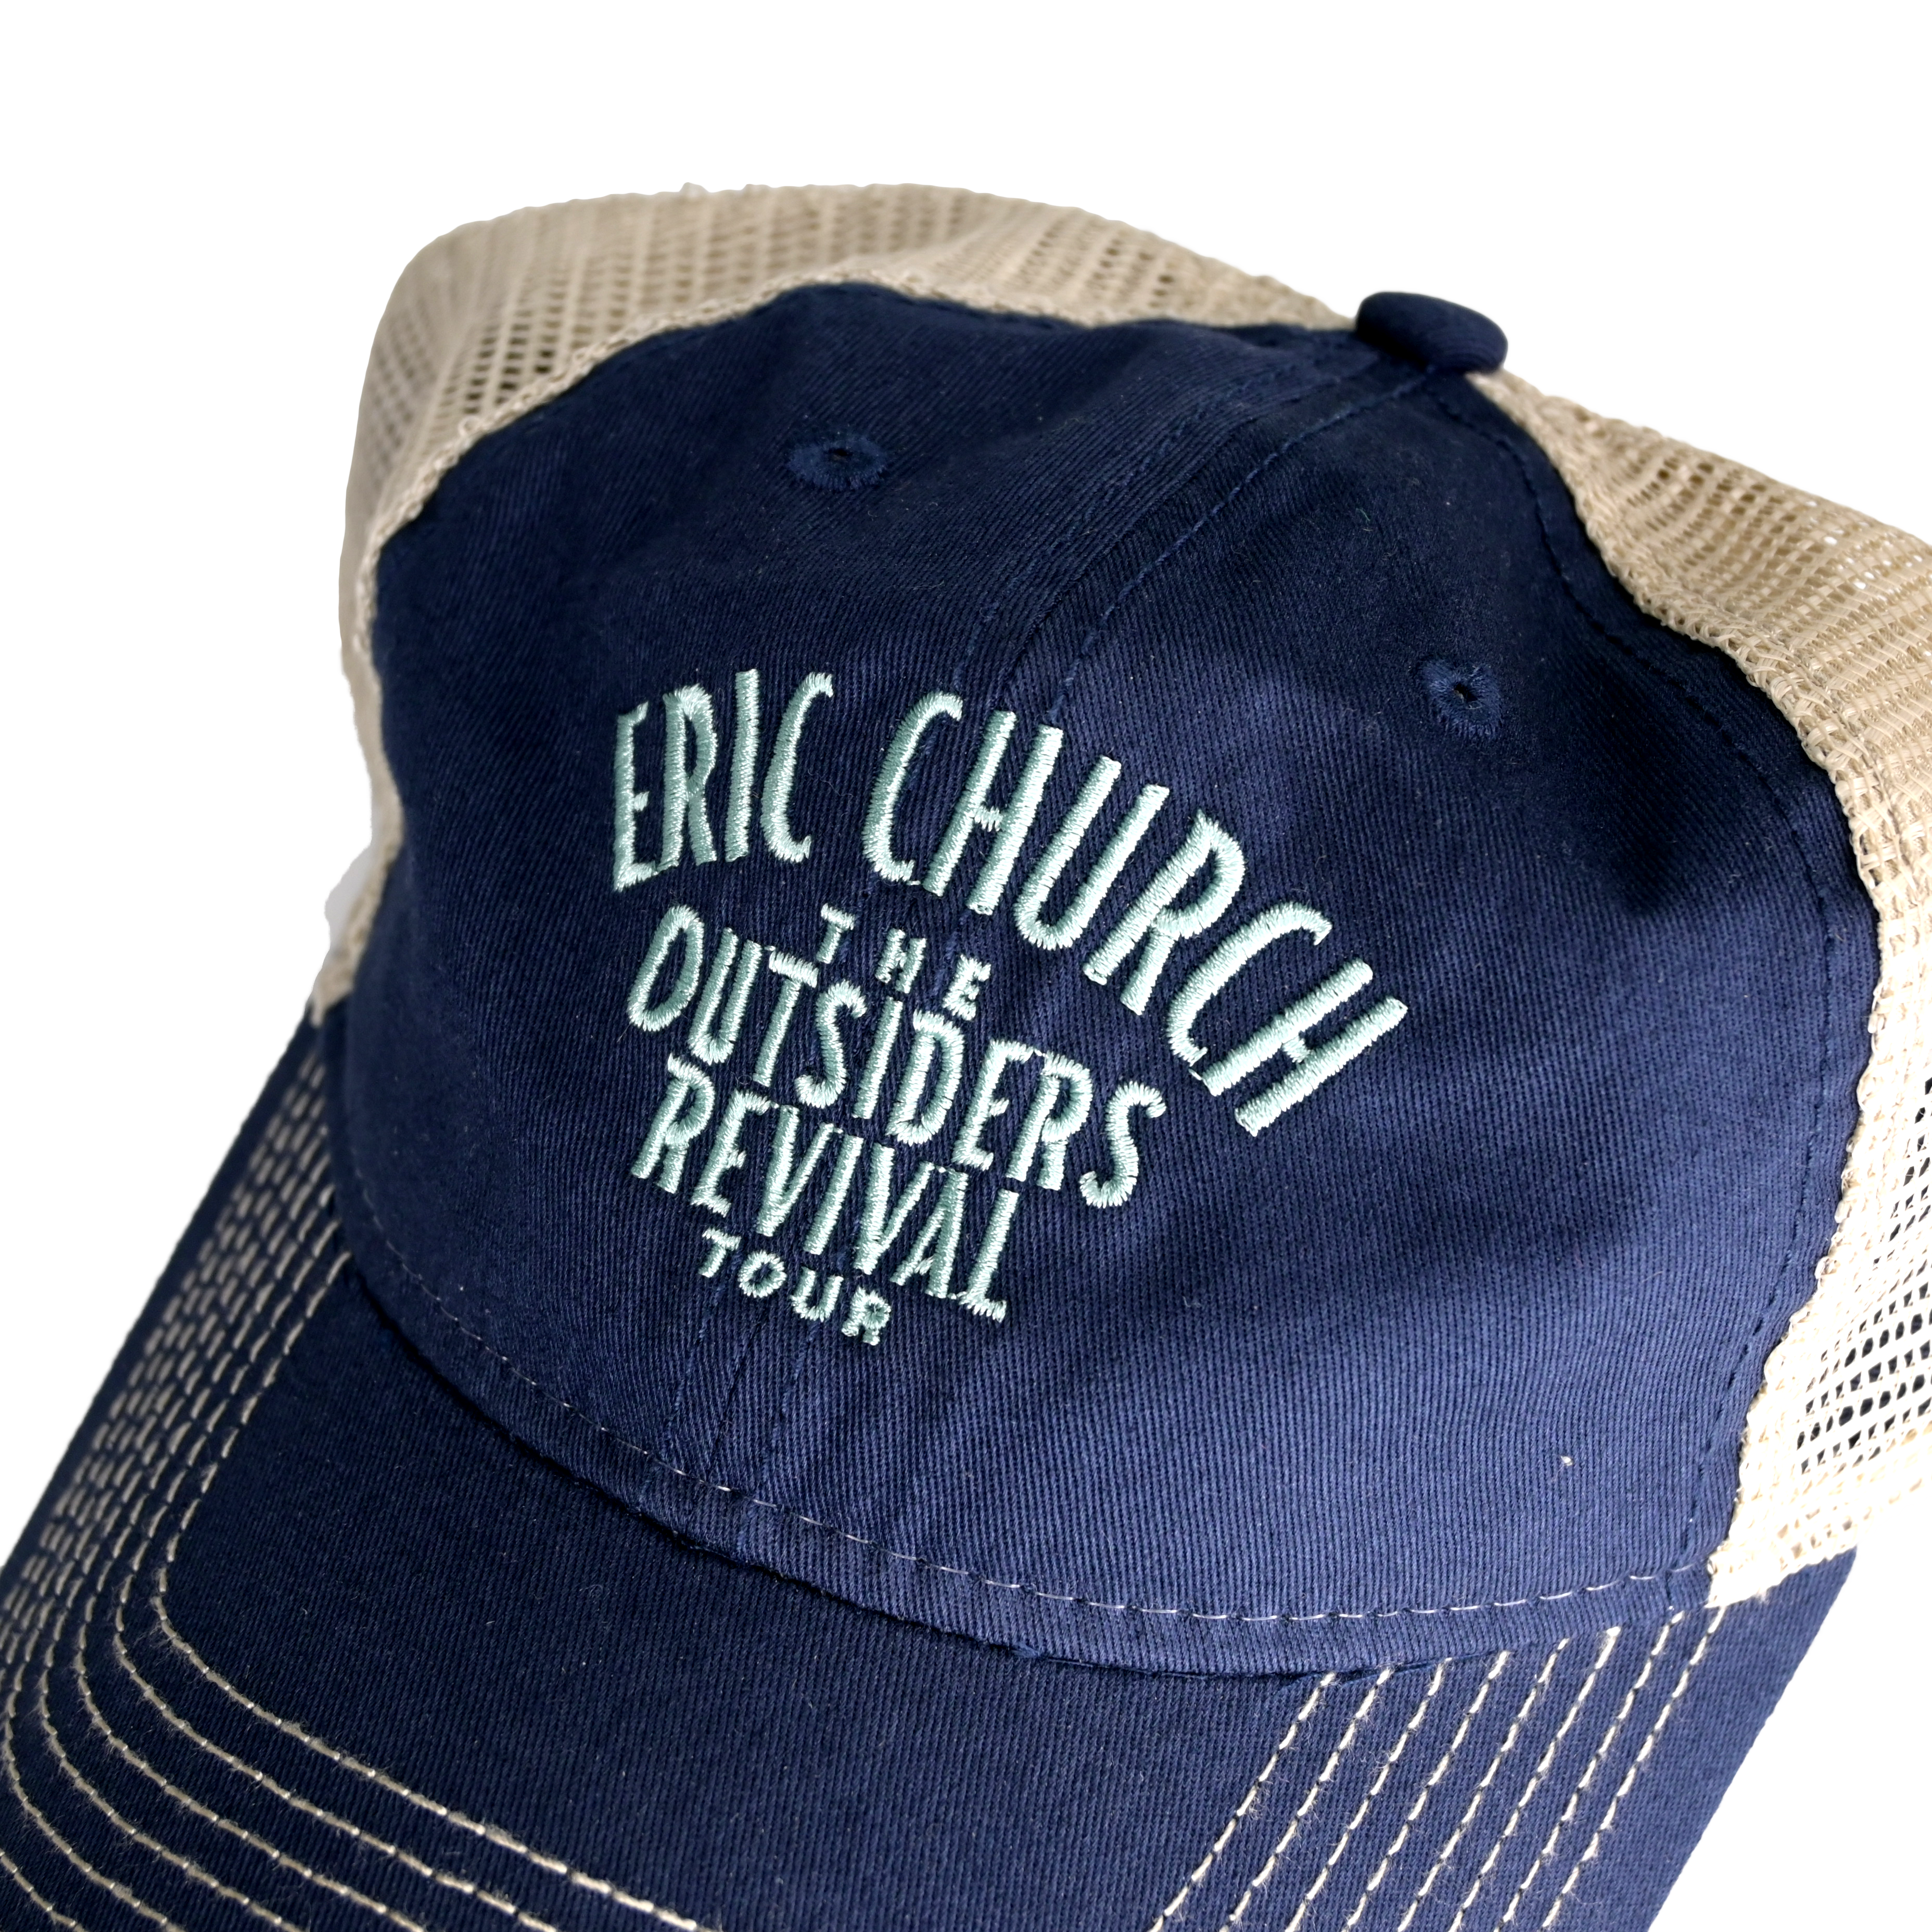 The Outsiders Revival Tour Hat